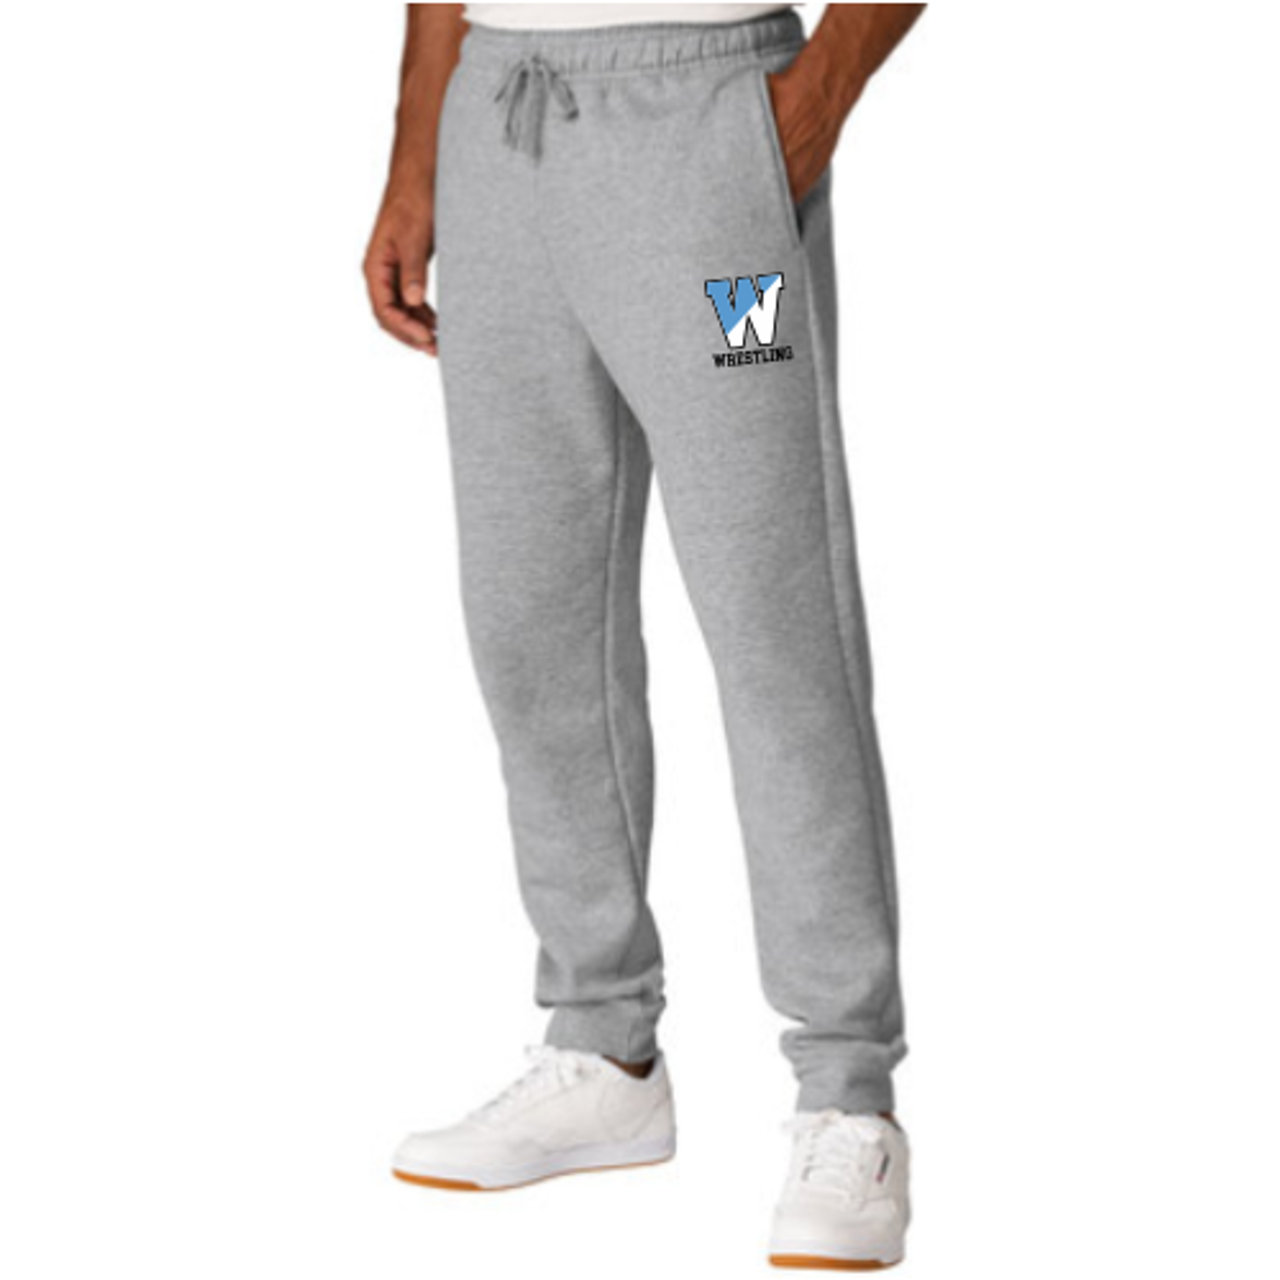 CMW Wrestling Midweight Jogger Sweatpant, Heather Gray